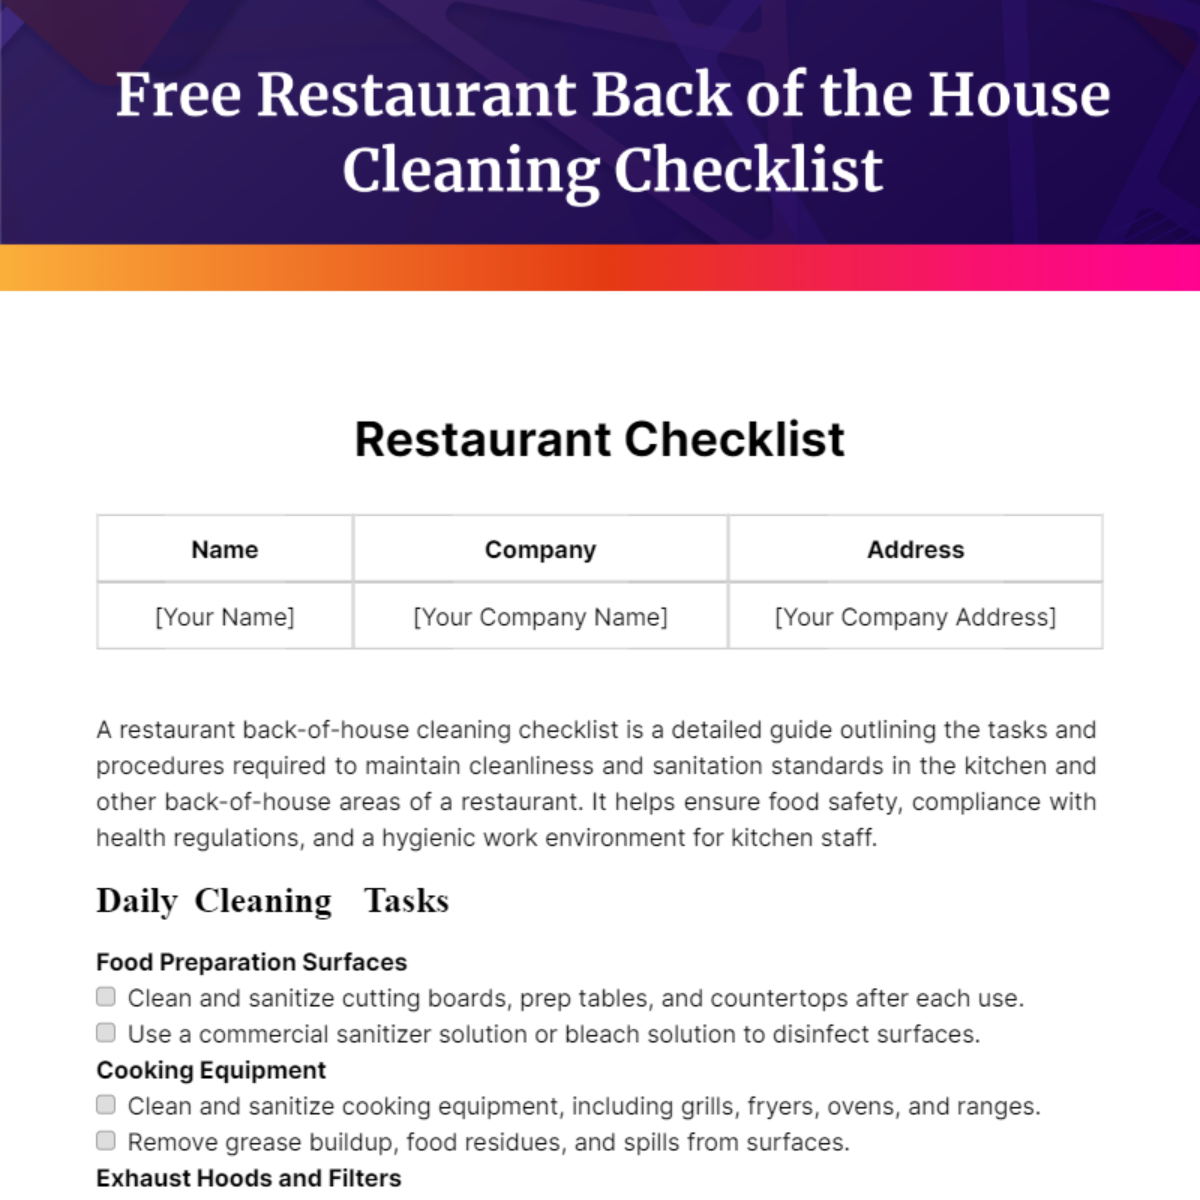 Restaurant Back of the House Cleaning Checklist Template